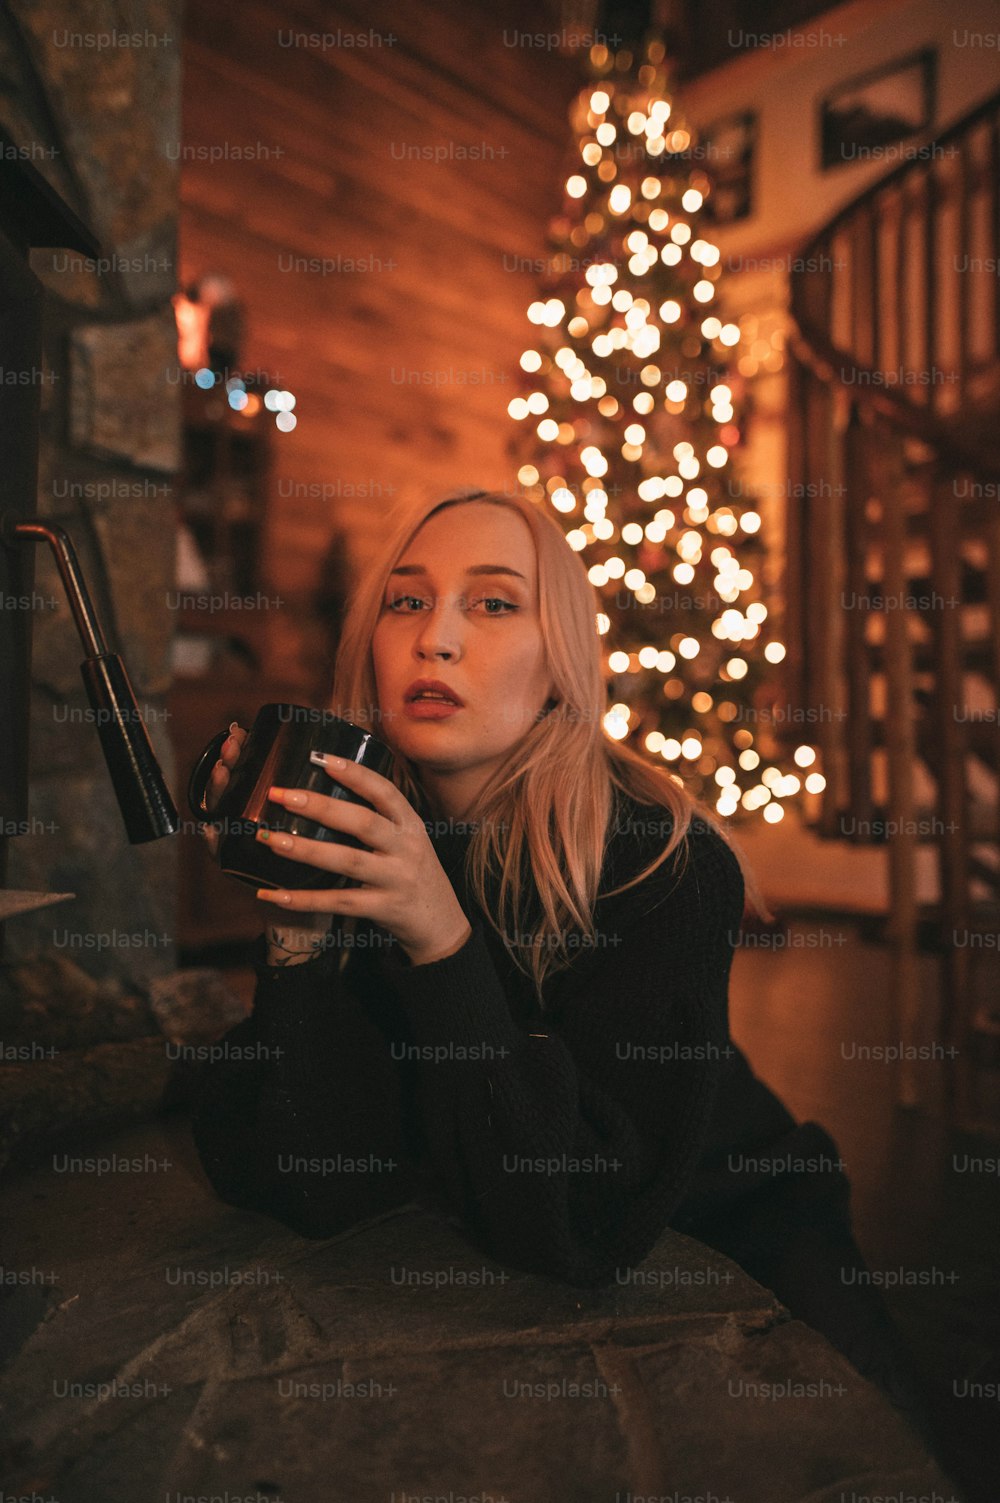 a woman sitting in front of a christmas tree holding a glass of wine